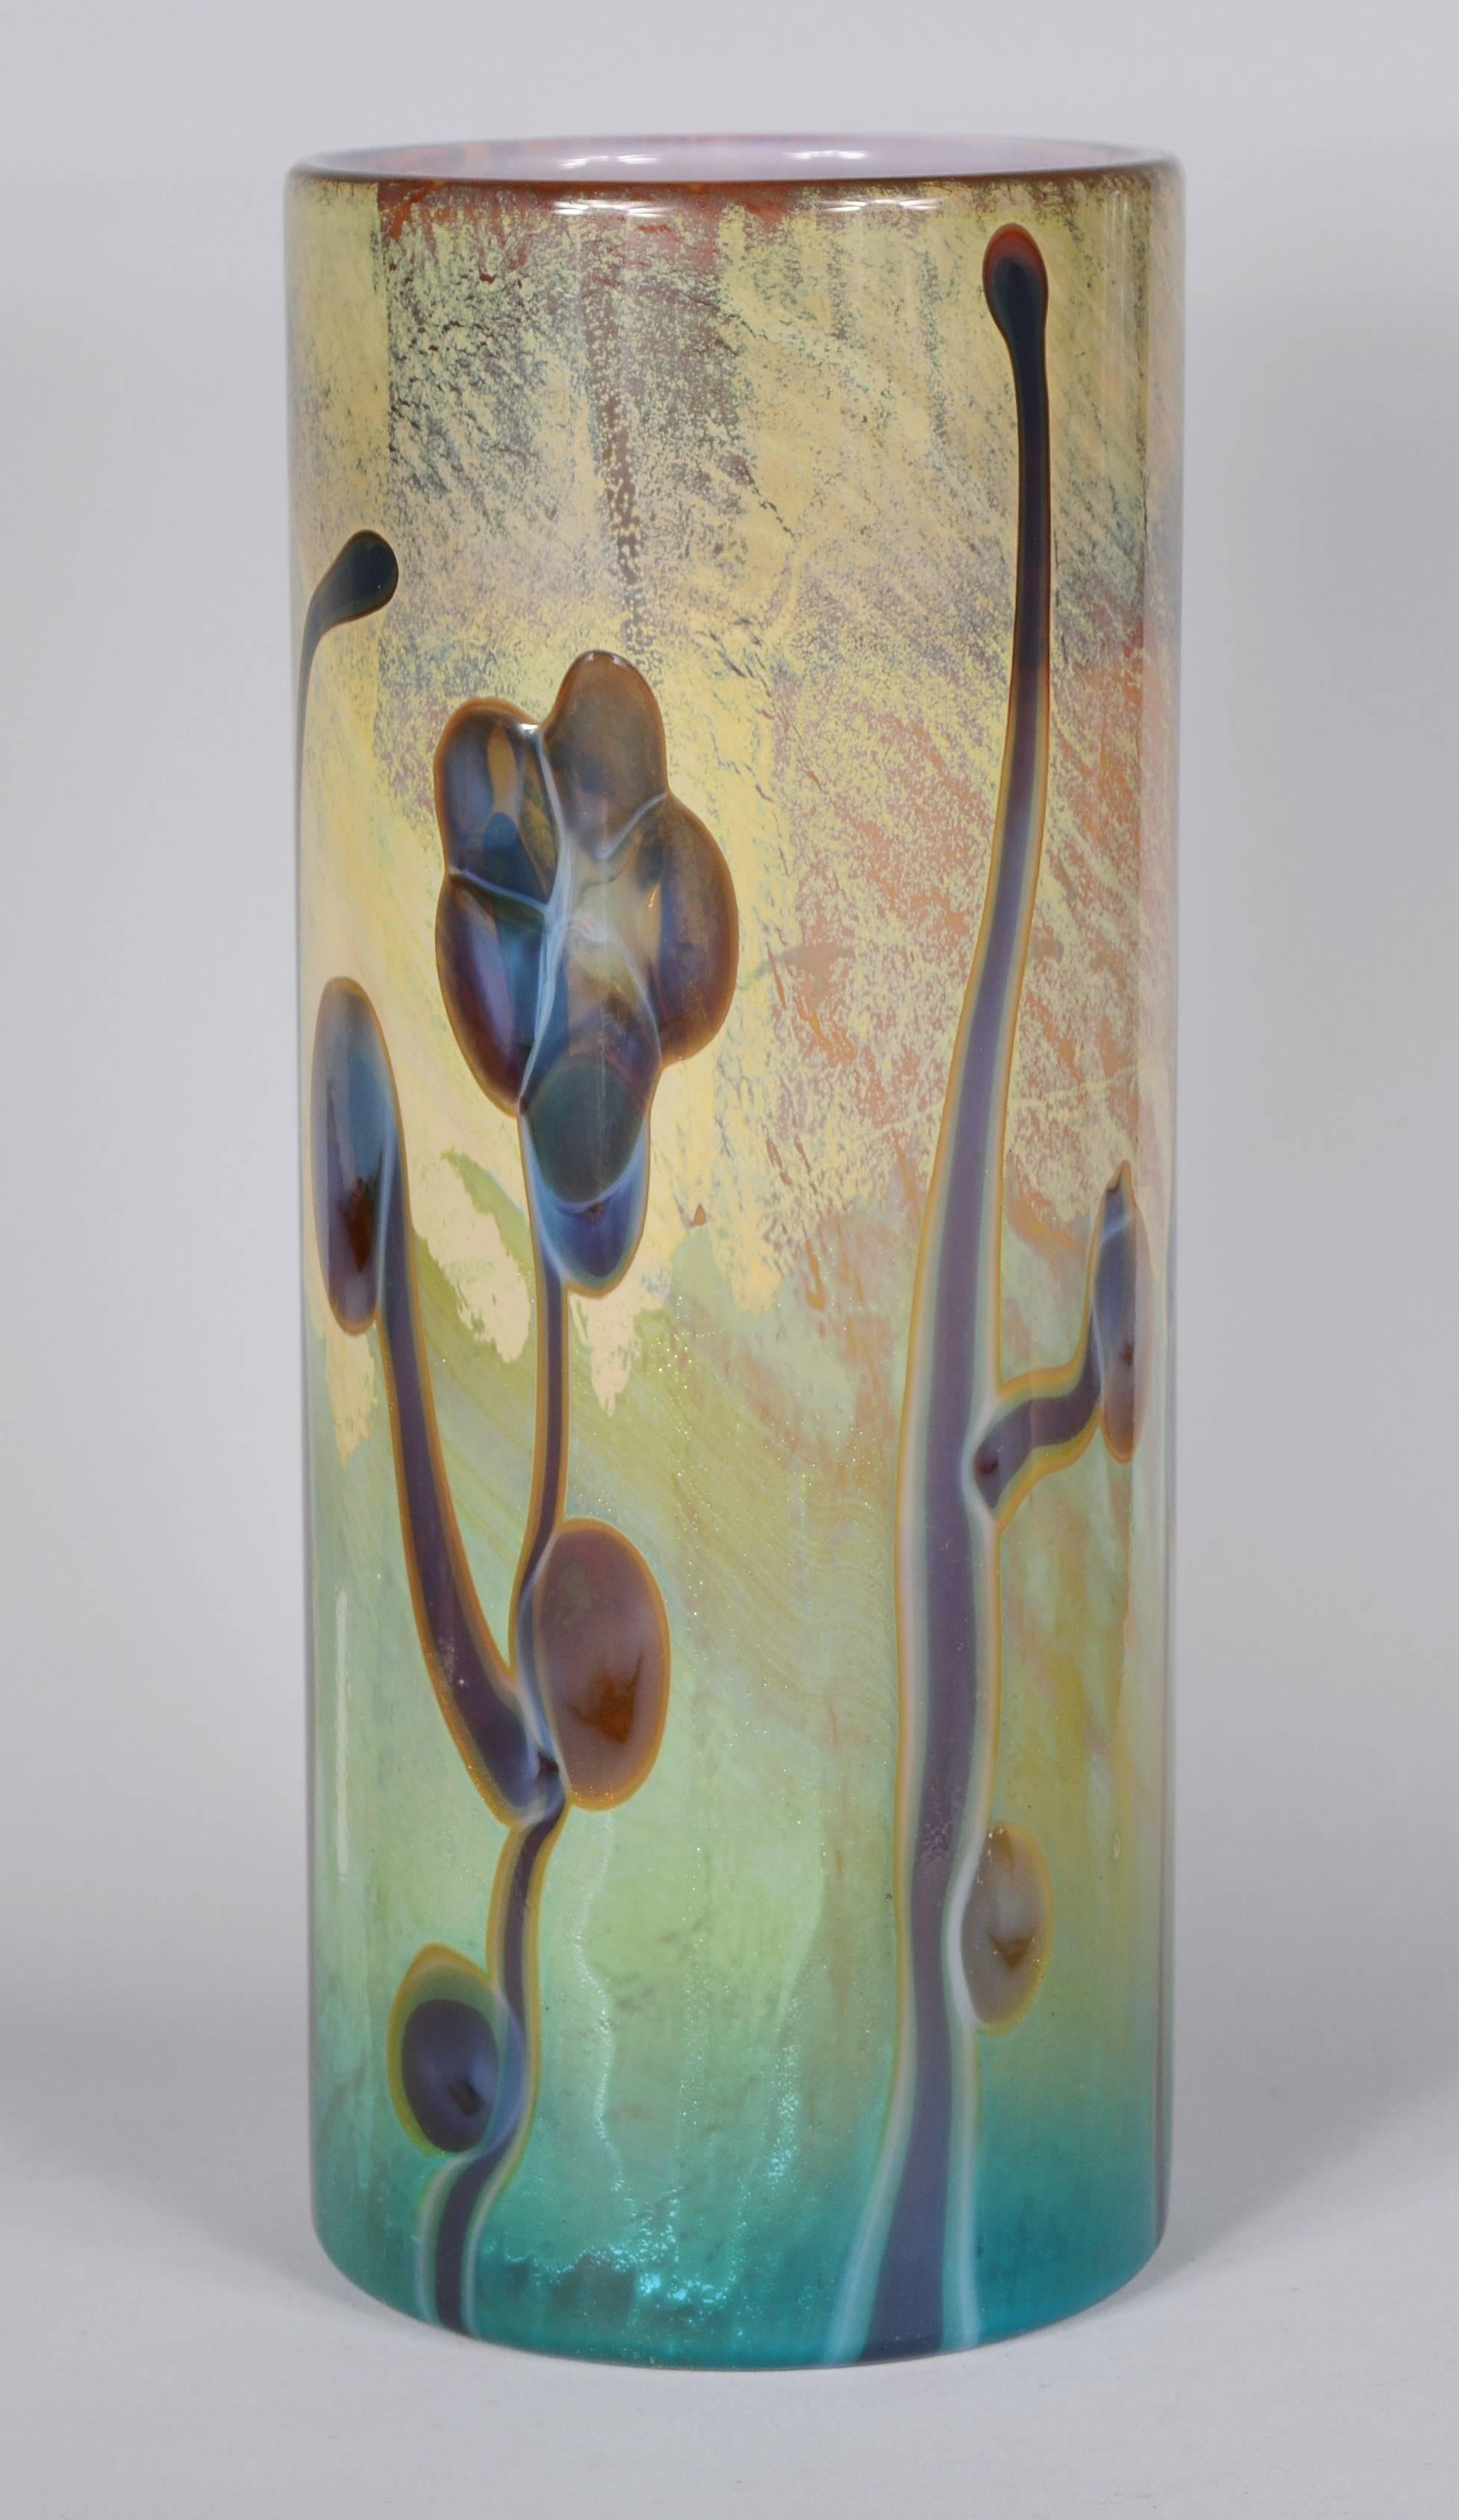 Cylindrical vase with an abstract floral motif by Cenedese. This has a painterly quality. The vase is numbered 26 out of an edition of 250.